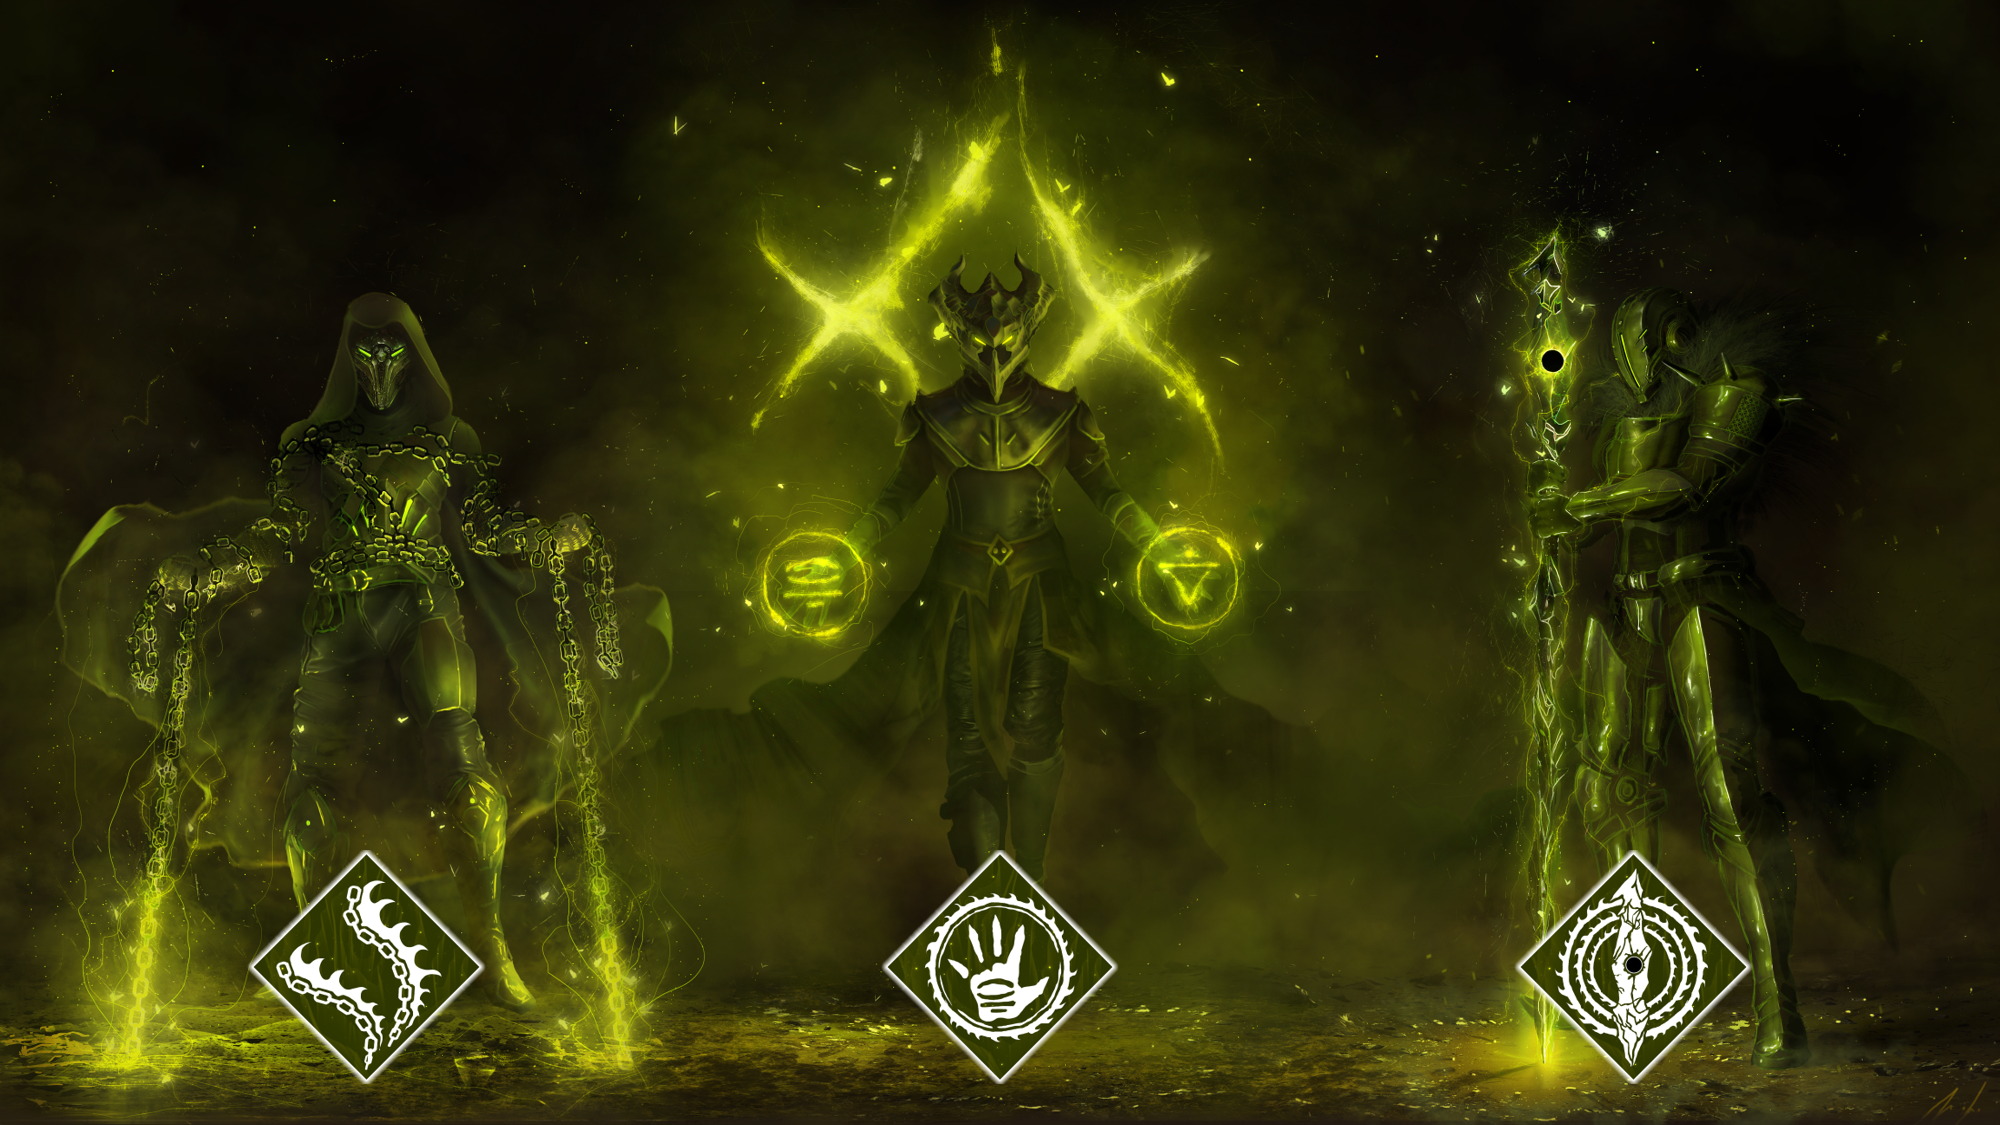 Corruption Is A New Fan Made Subclass Designed For Destiny 2 The Witch Queen